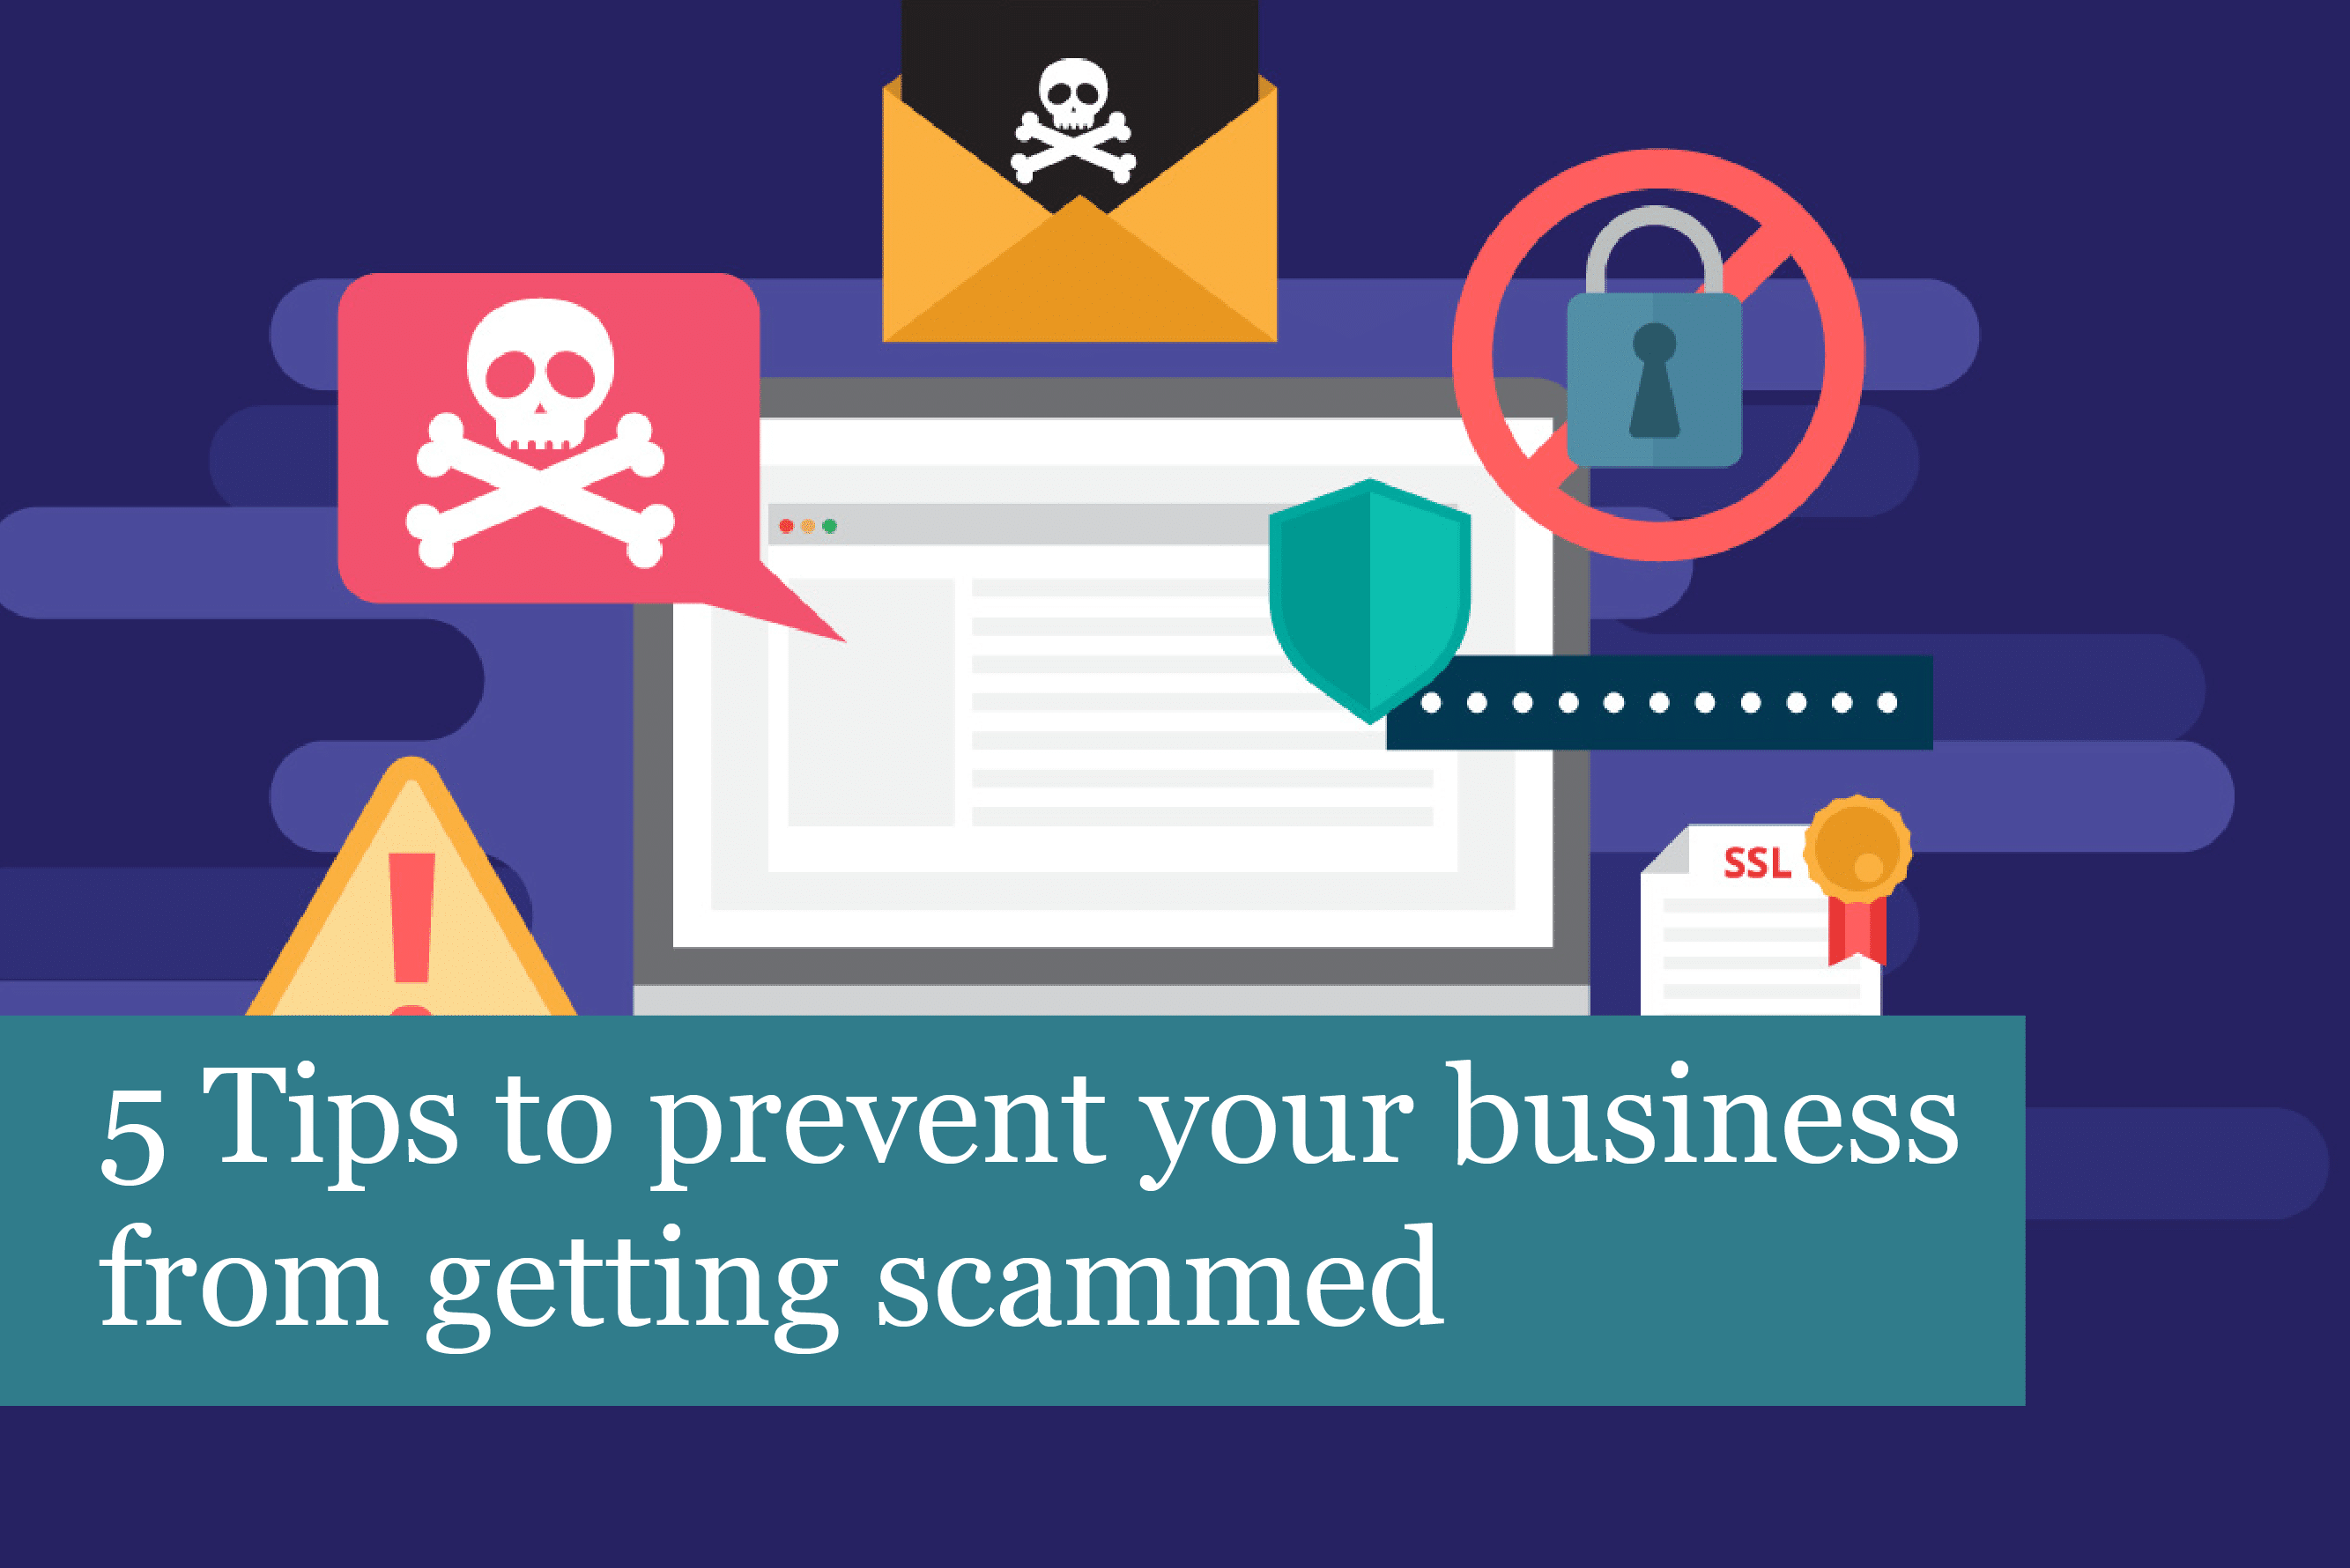 5 Tips to prevent your business from getting scammed